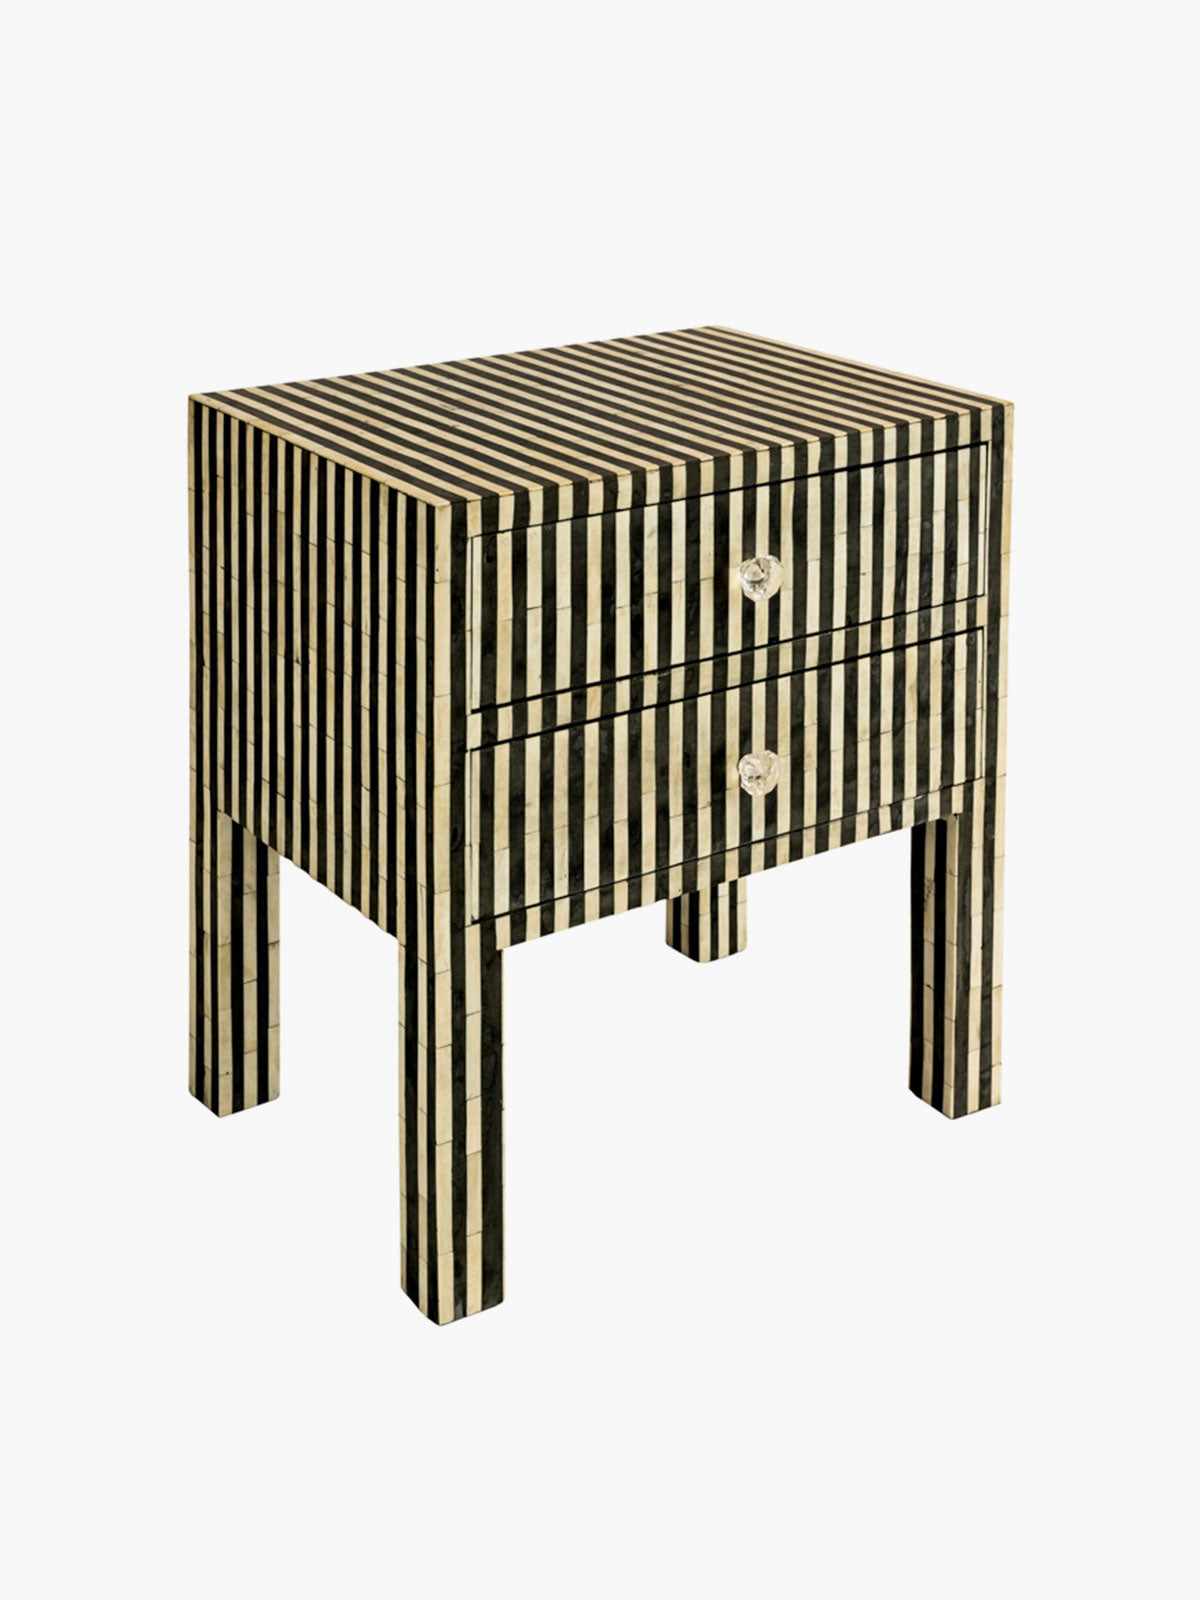 Bedside Table With Line Design